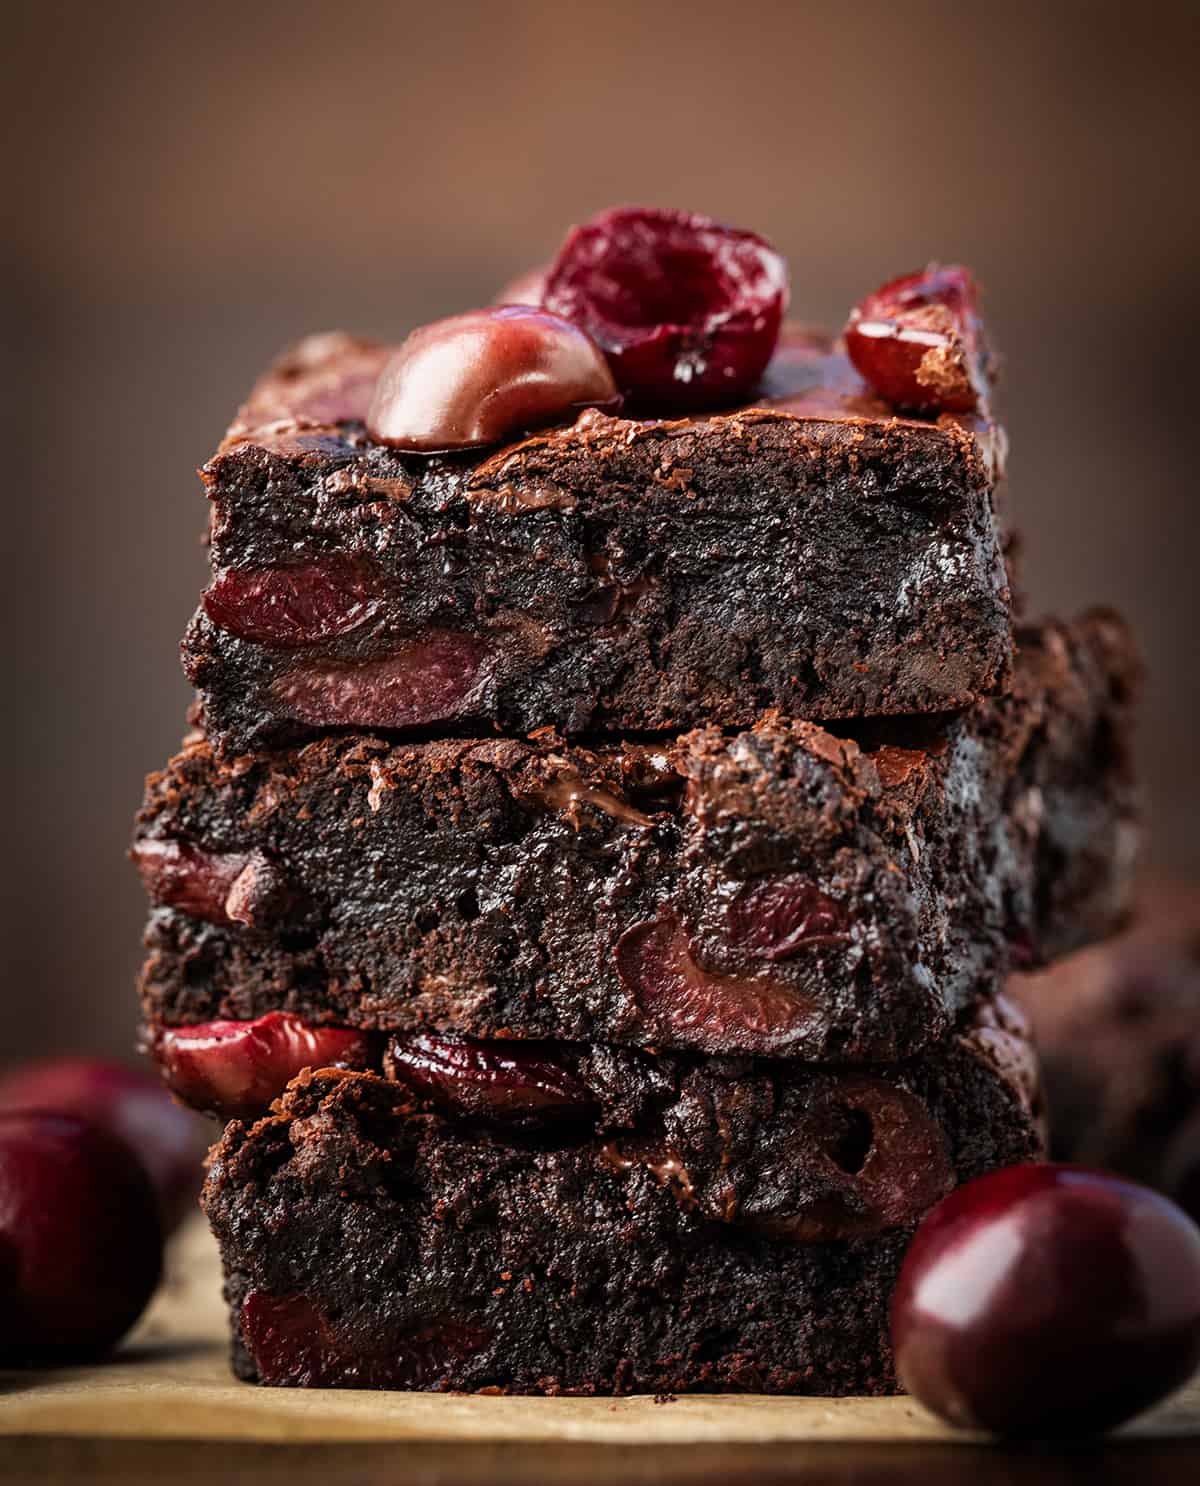 Stack of three Roasted Cherry Brownies on a wooden table surrounded by fresh cherries.